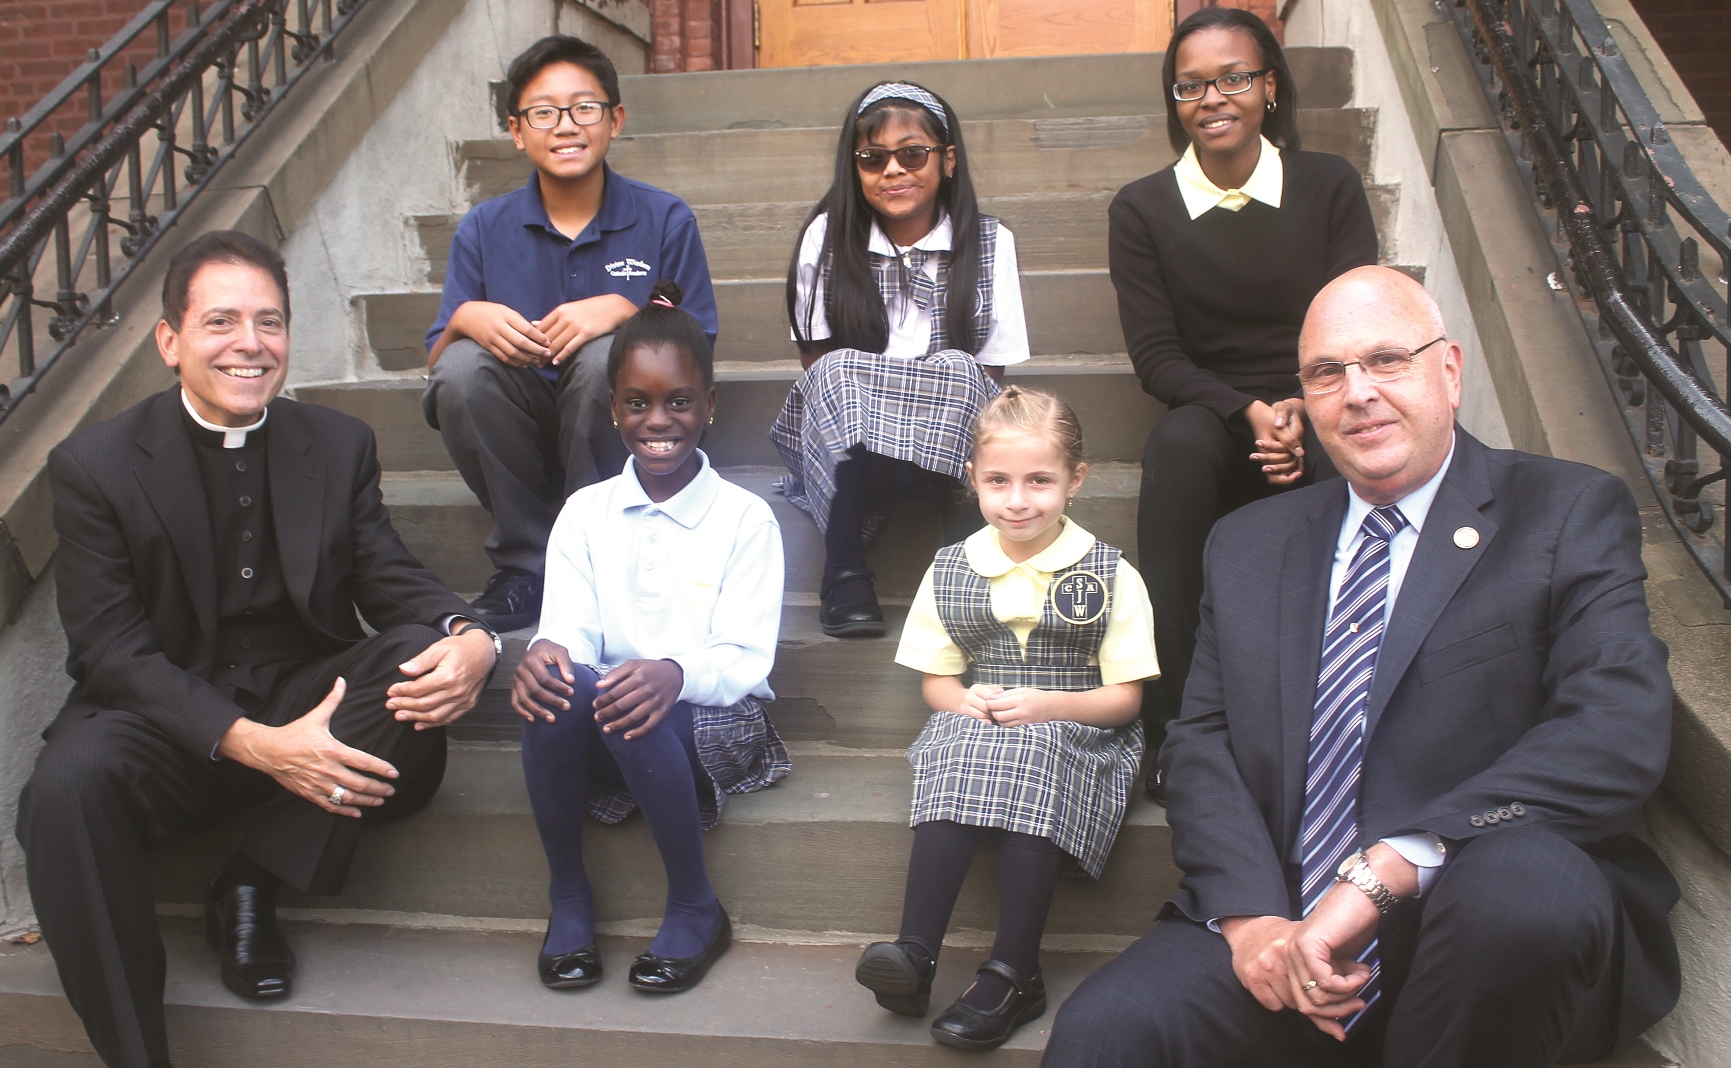 Monsignor Jamie Gigantiello and Superintendent of Schools for the Diocese of Brooklyn Thomas Chadzutko with youngsters Omodele Ojo, Brianna Wood, Maria Teresa Heyer, Raymond Ricco and Christina Desanges.